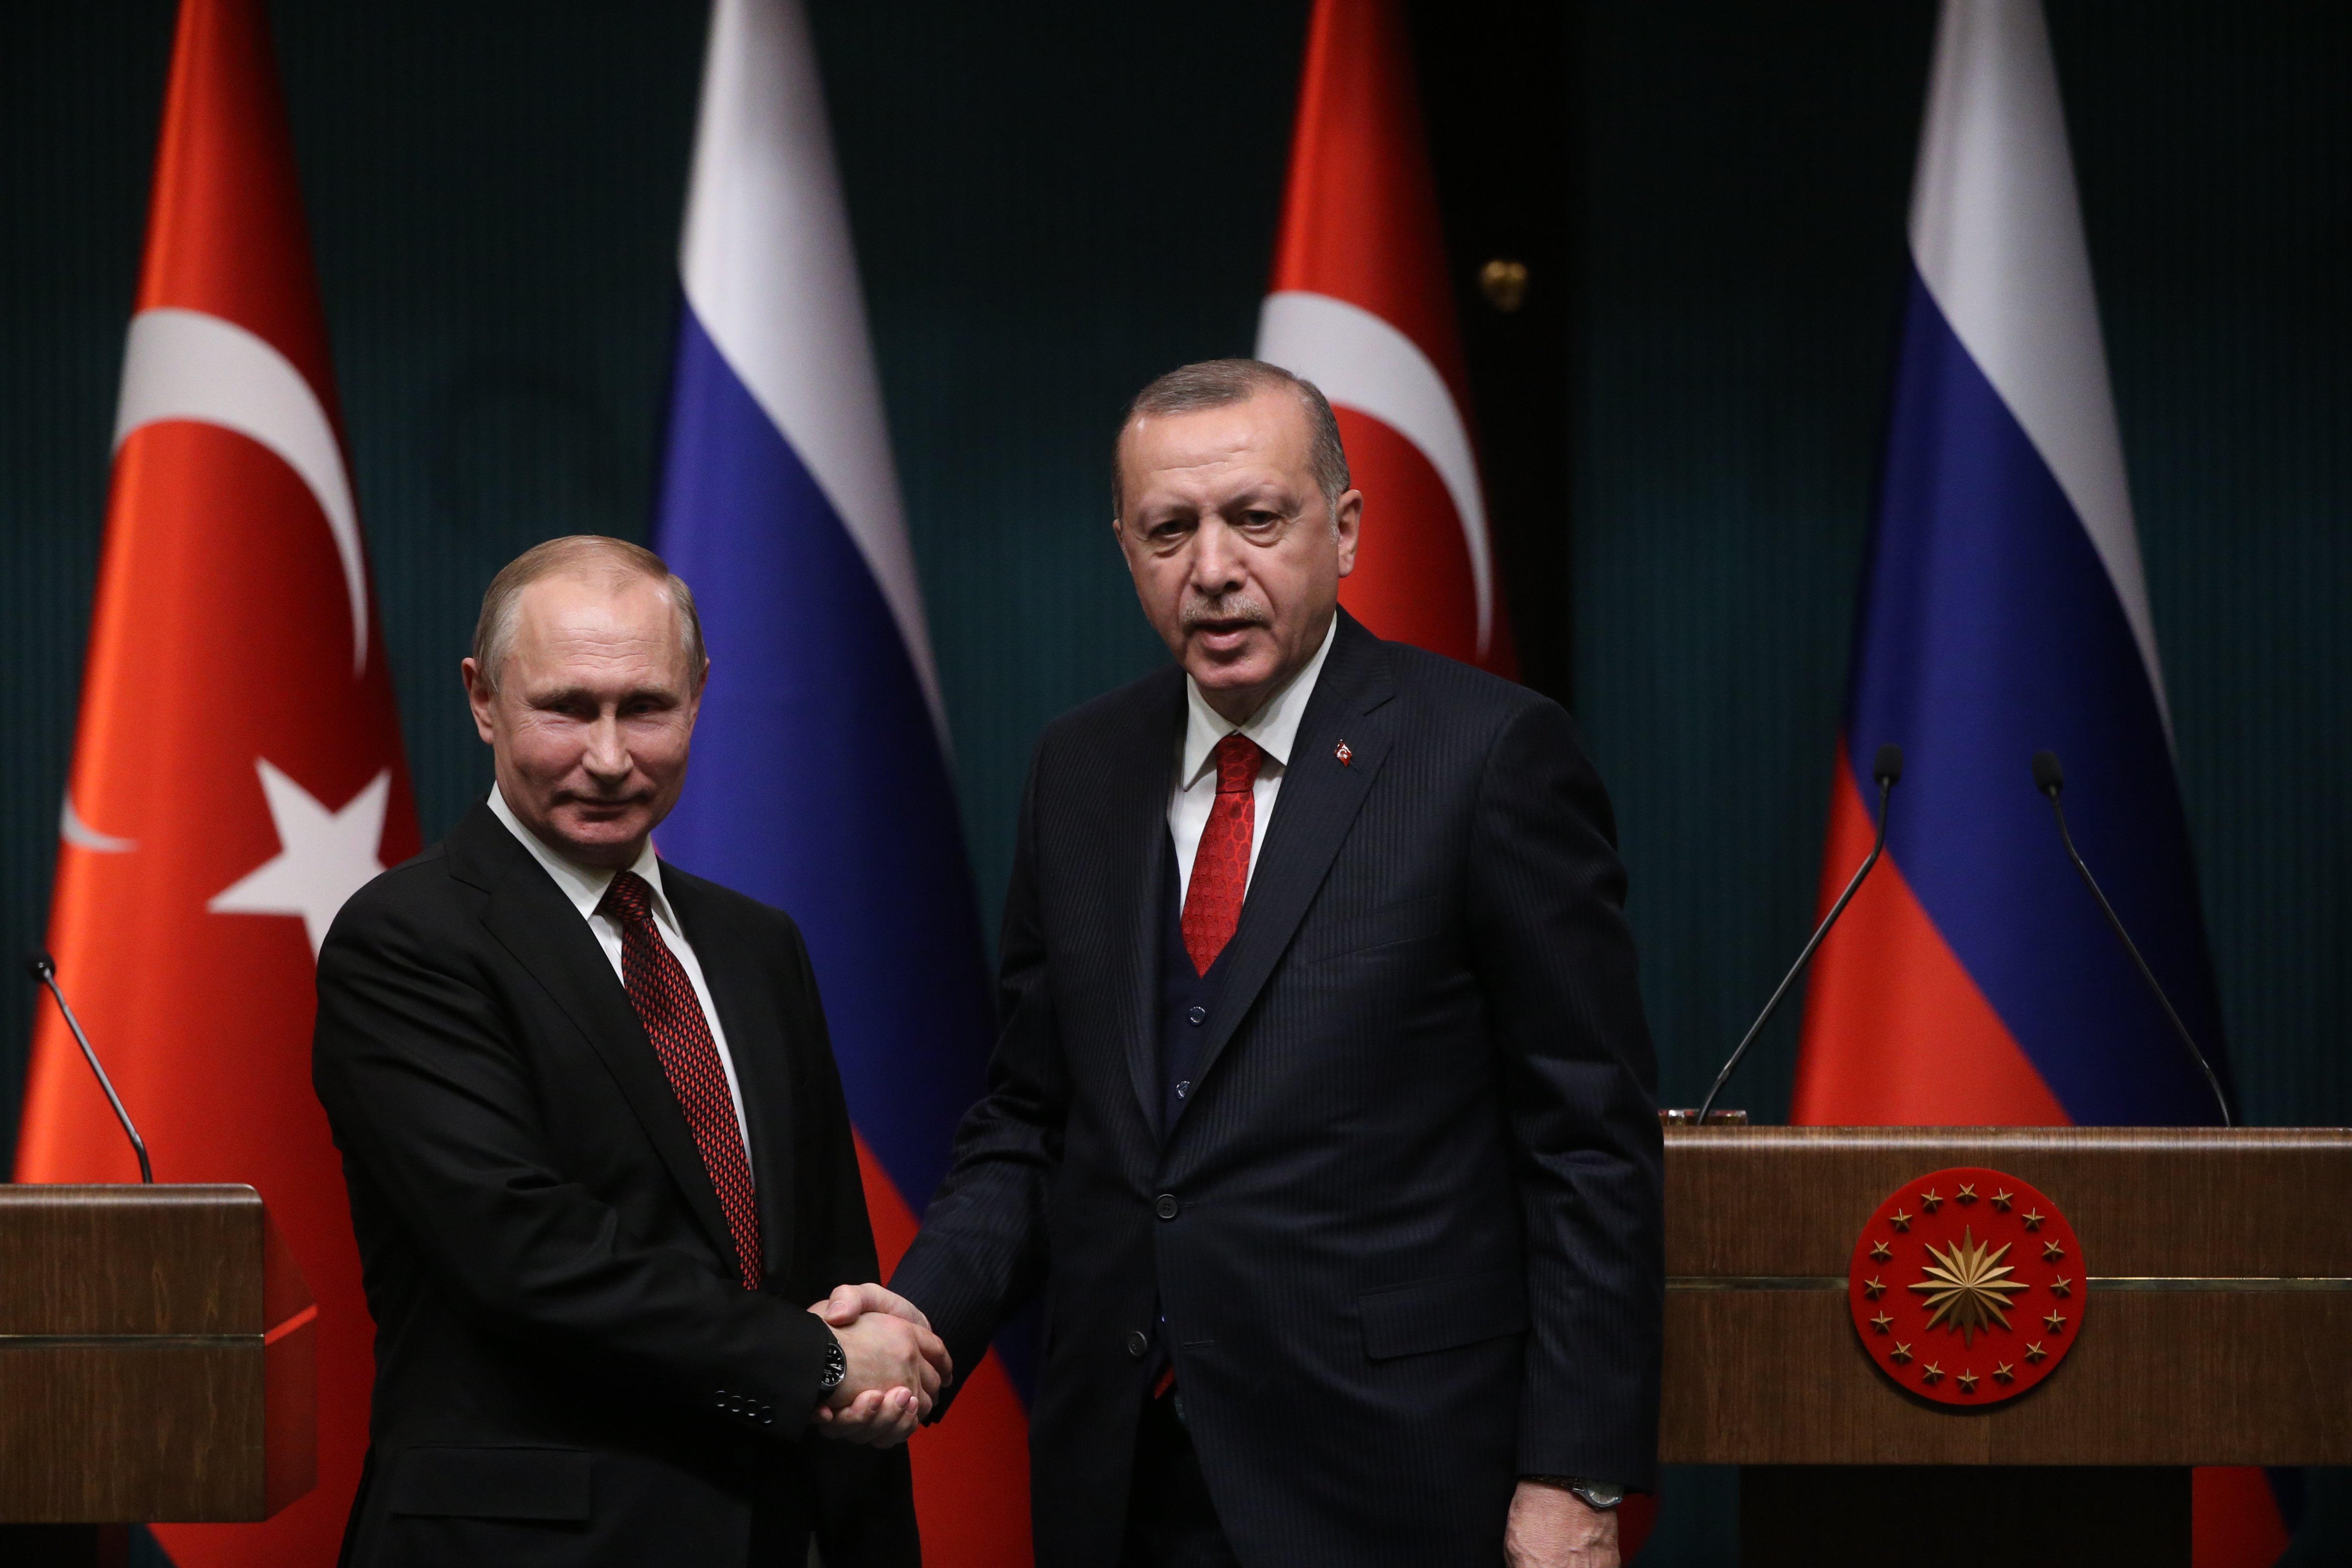 Russian President Vladimir Putin shakes hands with Turkish President Recep Tayyip Erdogan during their joint press conference at the presidential palace on April 3, 2018 in Ankara, Turkey. (Mikhail Svetlov—Getty Images)